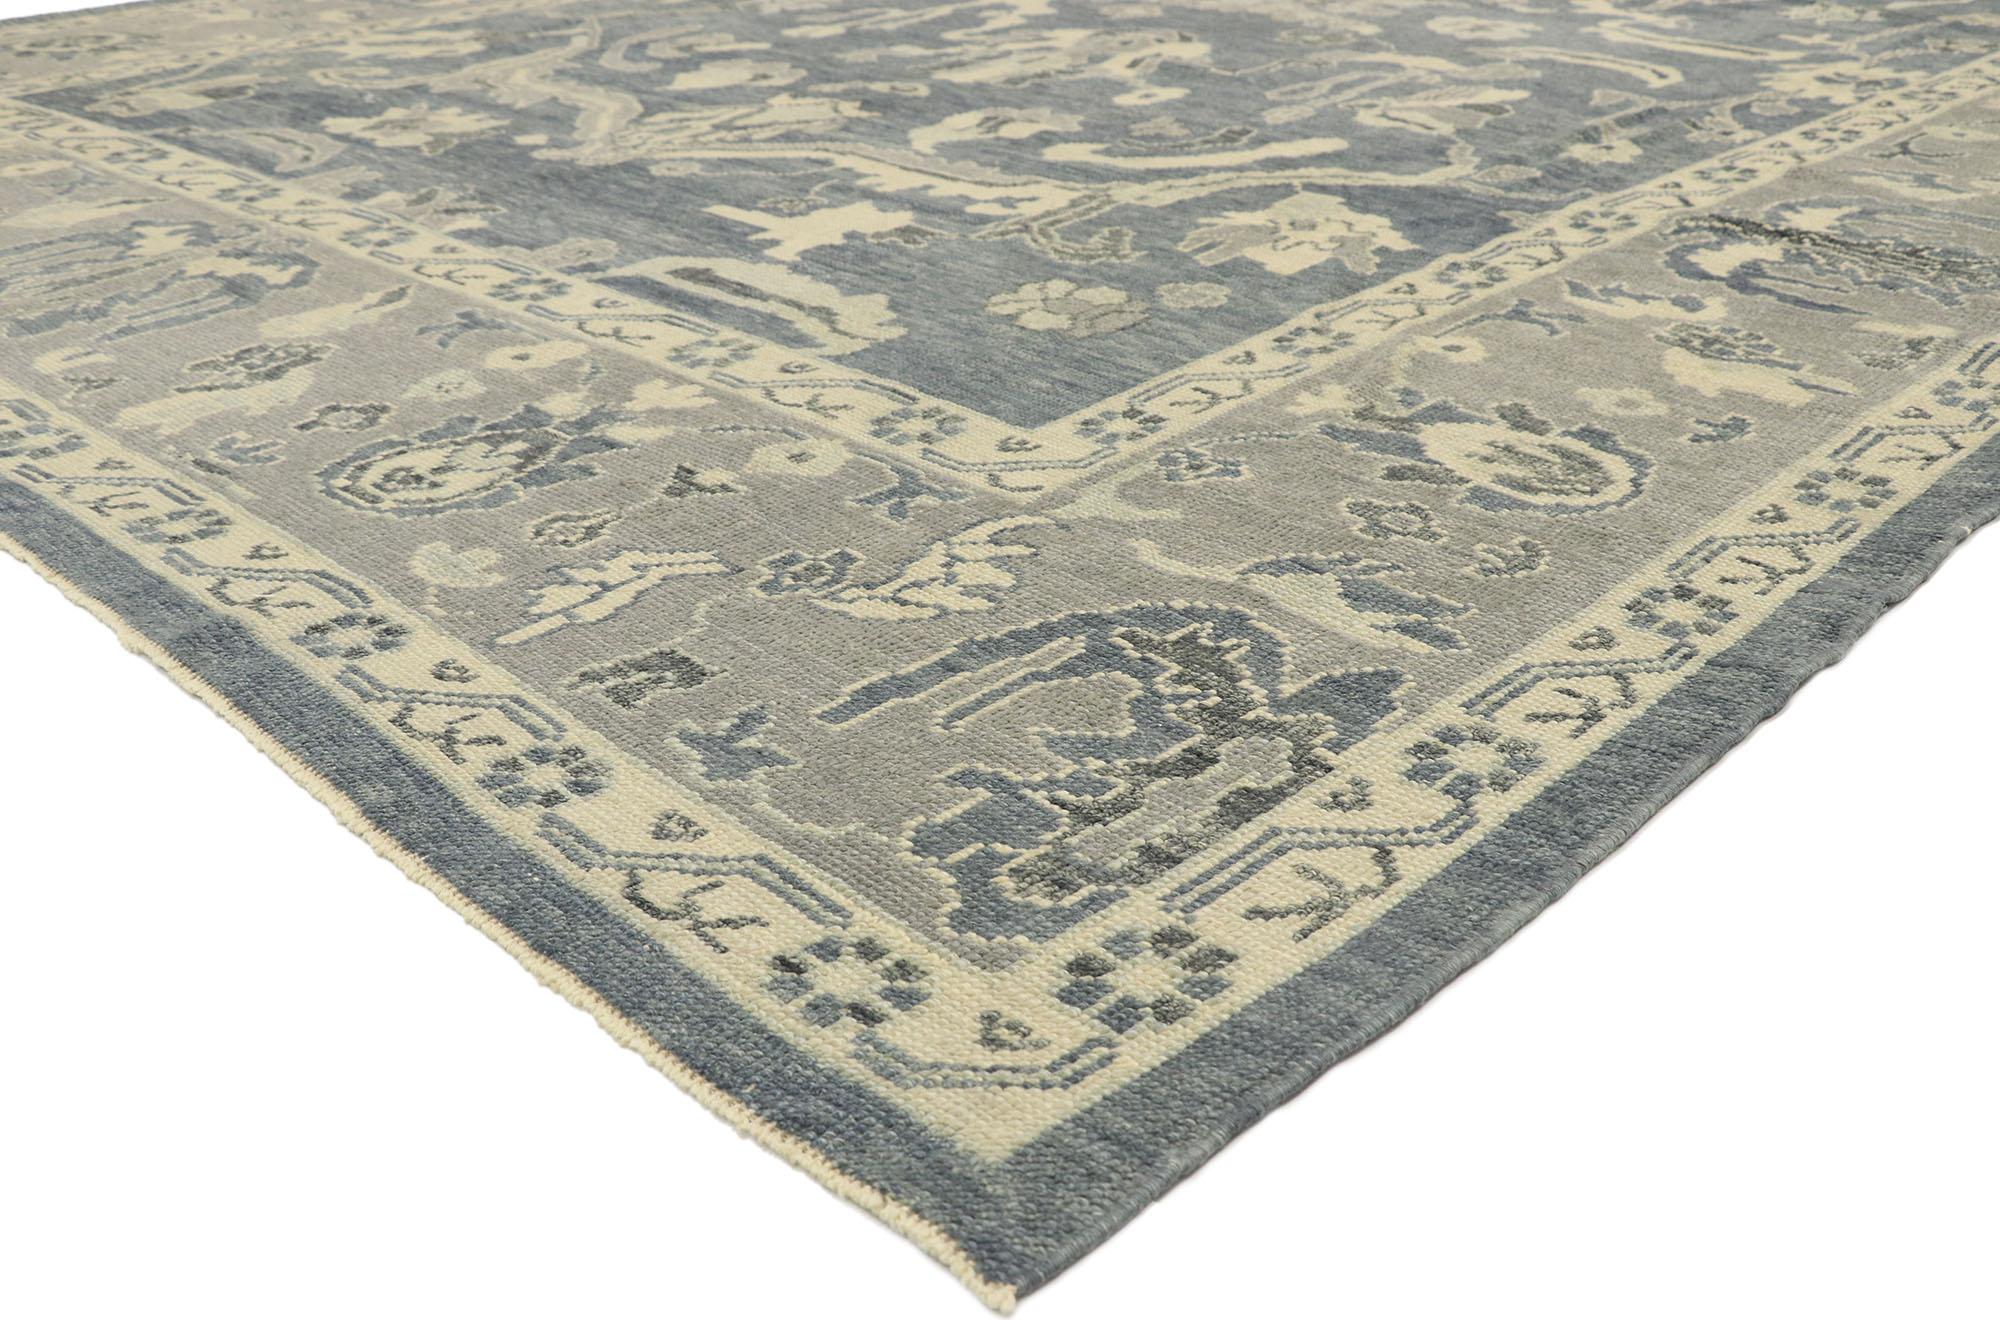 52905, nNew Contemporary Turkish Oushak Rug with Modern Transitional Style 09'11 x 14'00. Blending elements from the modern world with bluish and gray hues, this hand knotted wool contemporary Turkish Oushak rug will boost the coziness factor in